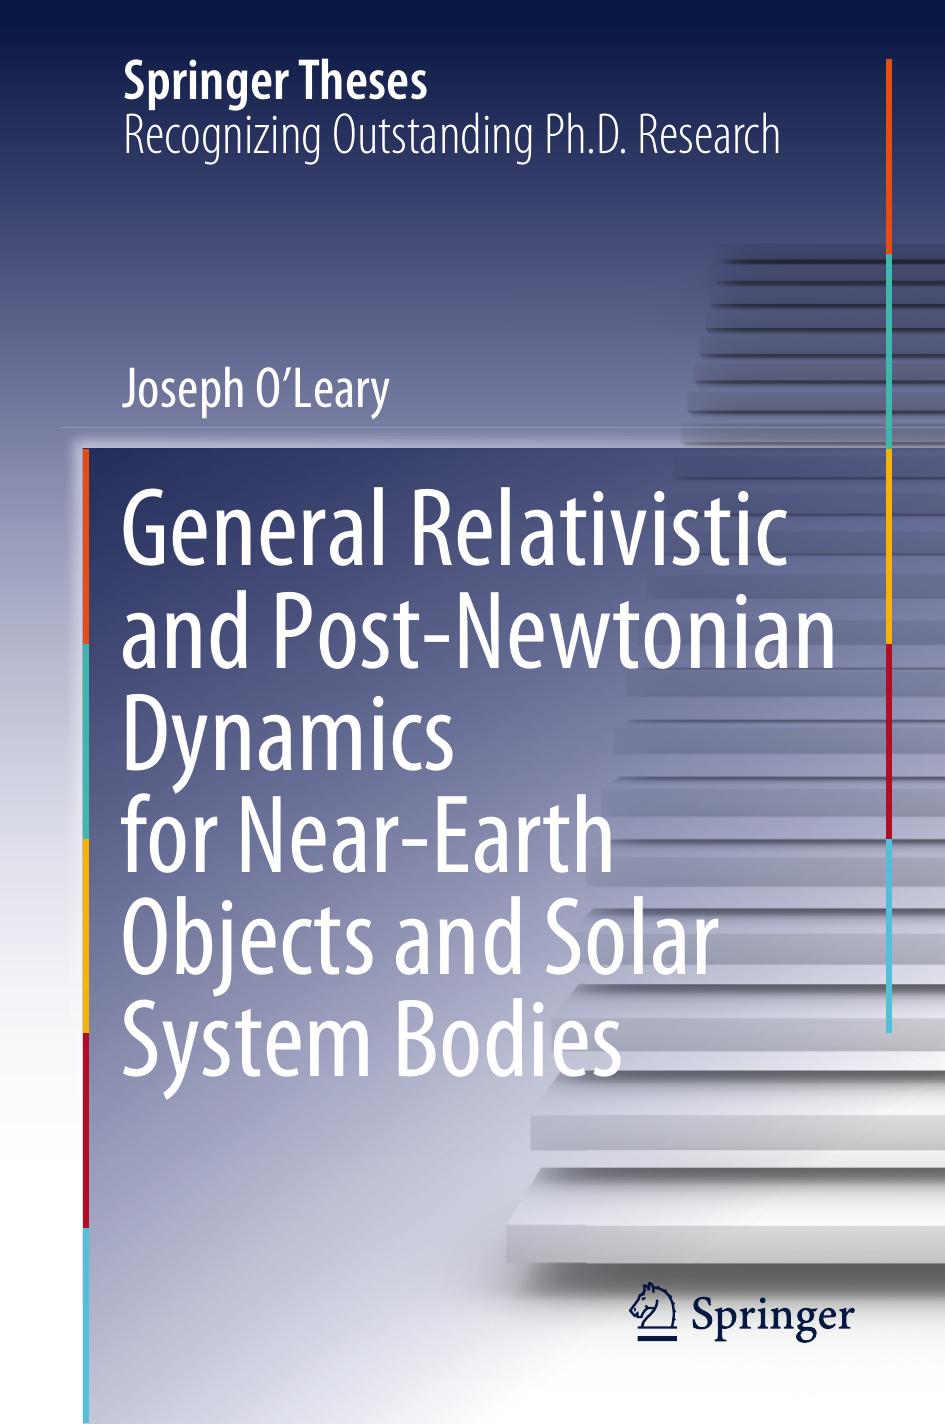 General Relativistic and Post-Newtonian Dynamics for Near-Earth Objects and Solar System Bodies by Joseph O’Leary